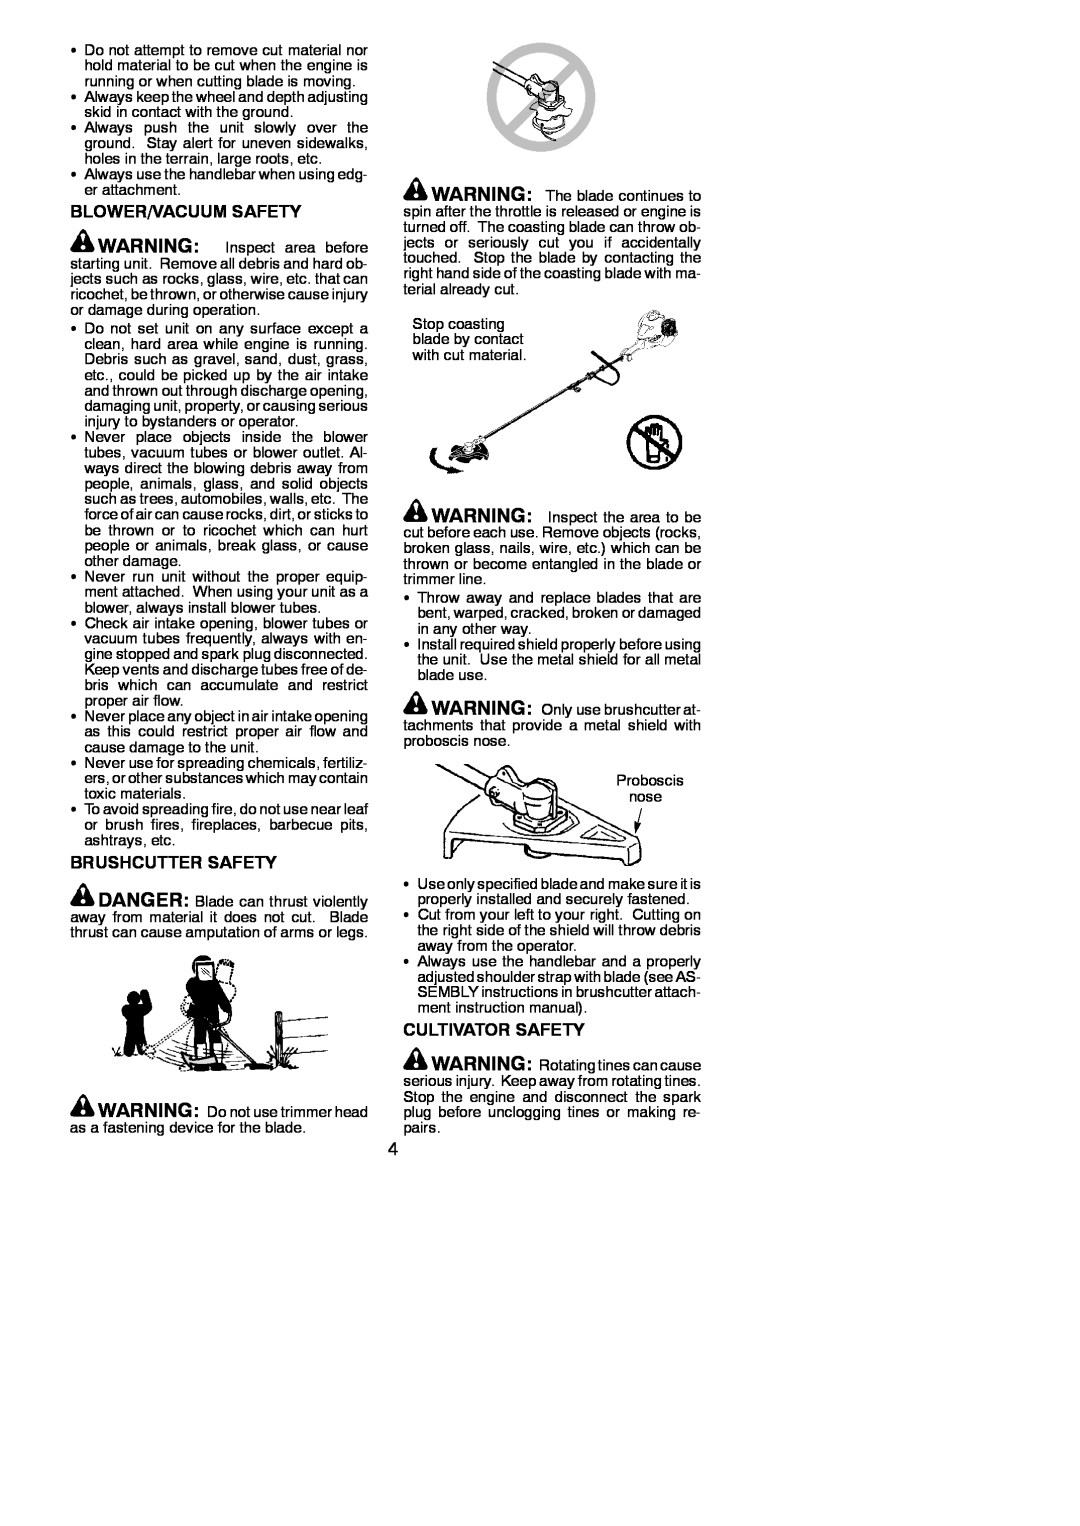 Poulan PP025 instruction manual Blower/Vacuum Safety, Brushcutter Safety, Cultivator Safety 